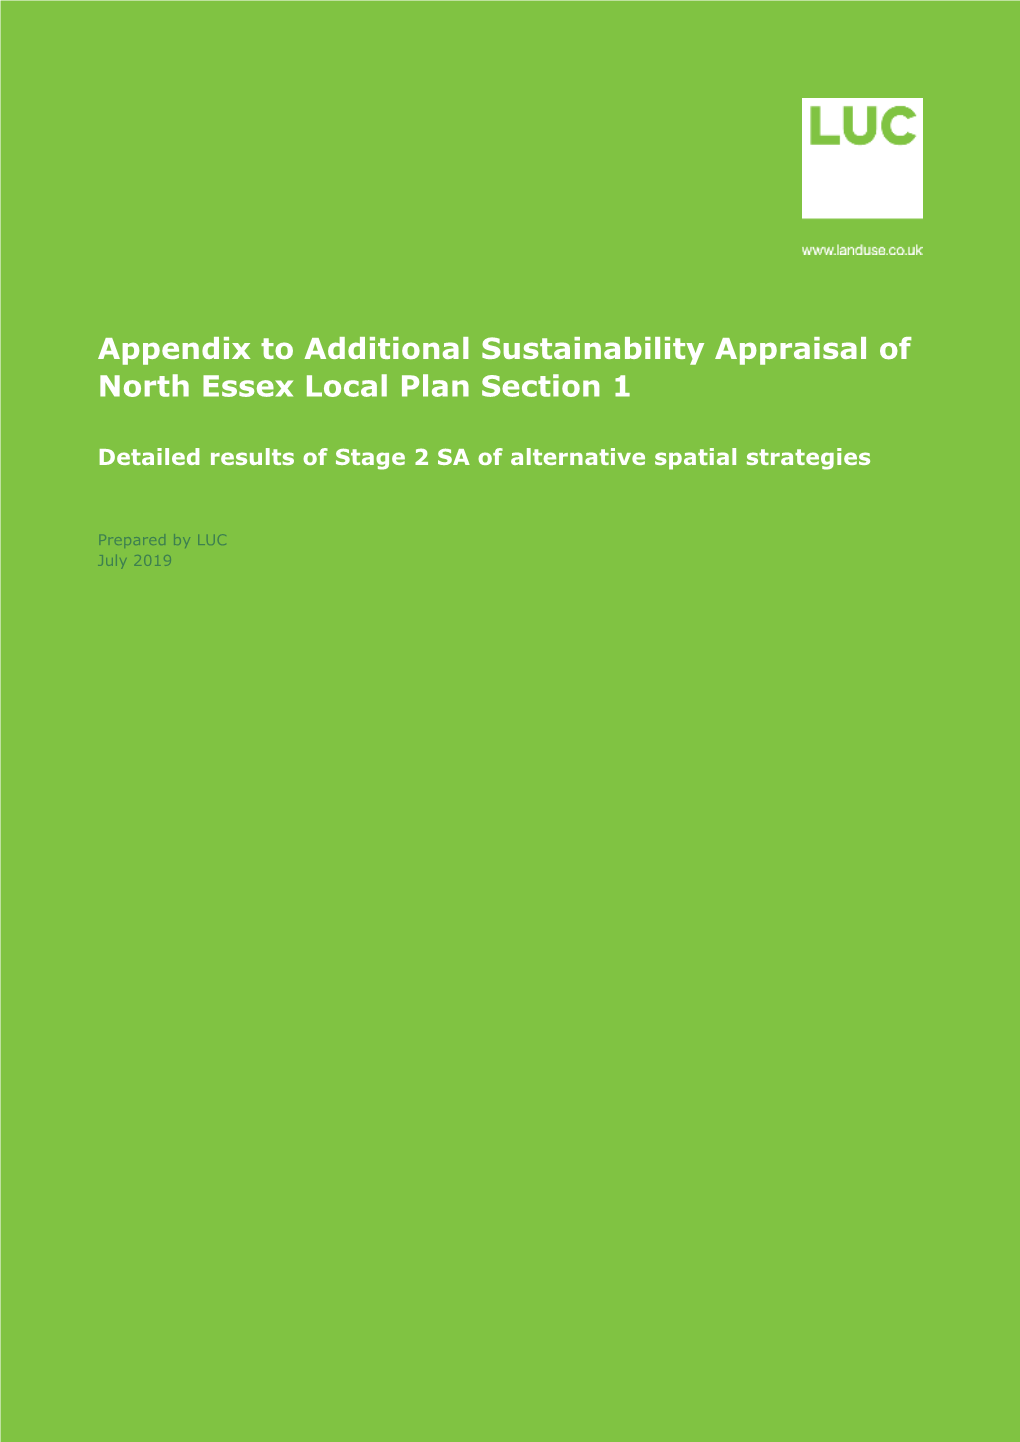 Appendix to Additional Sustainability Appraisal of North Essex Local Plan Section 1